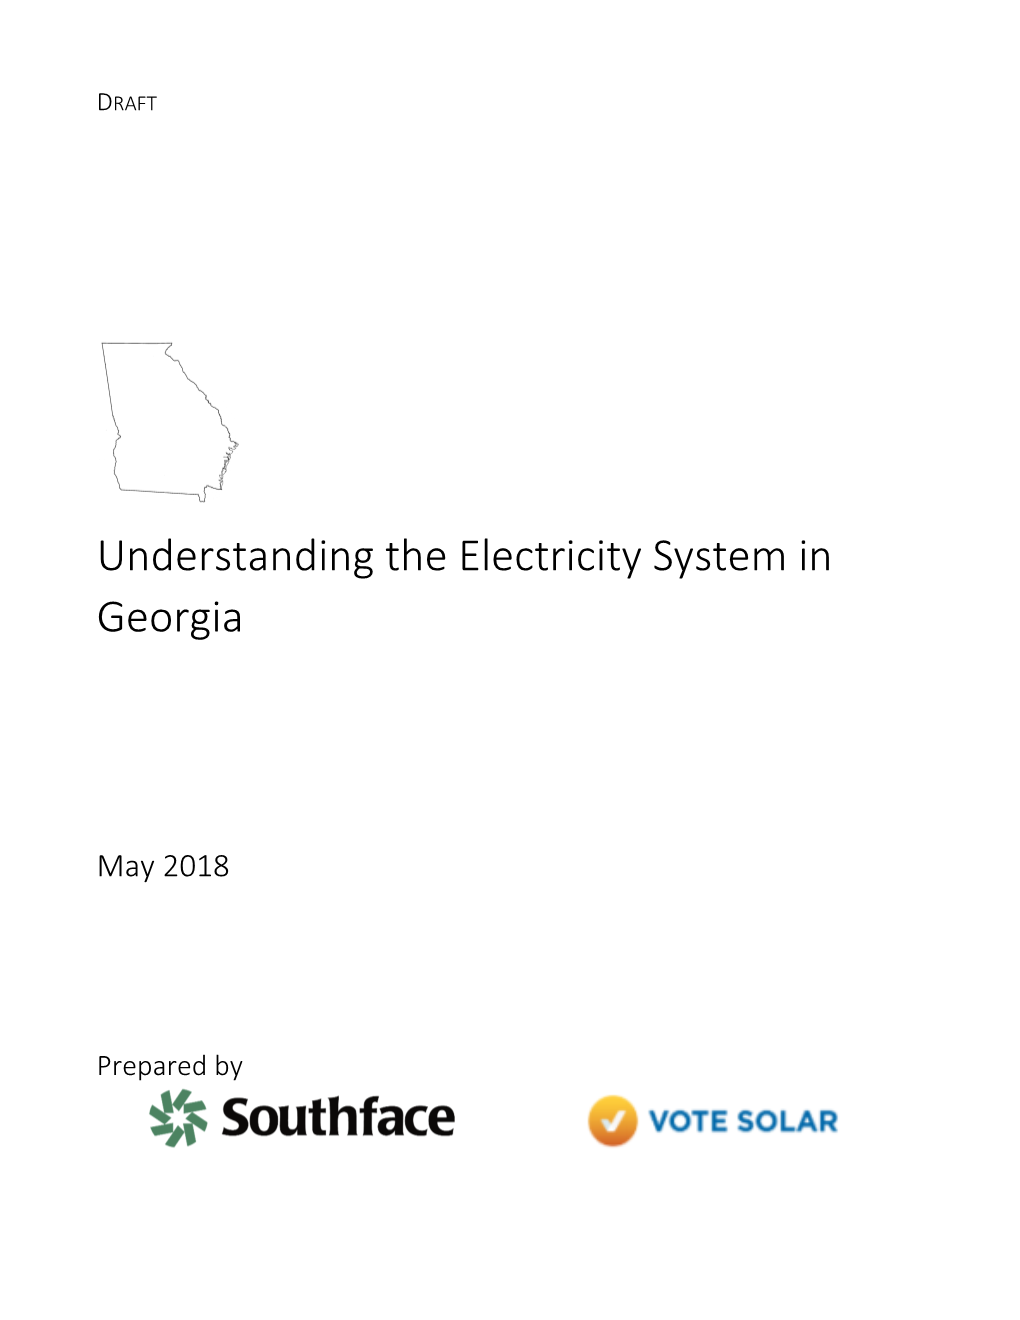 Understanding the Electricity System in Georgia